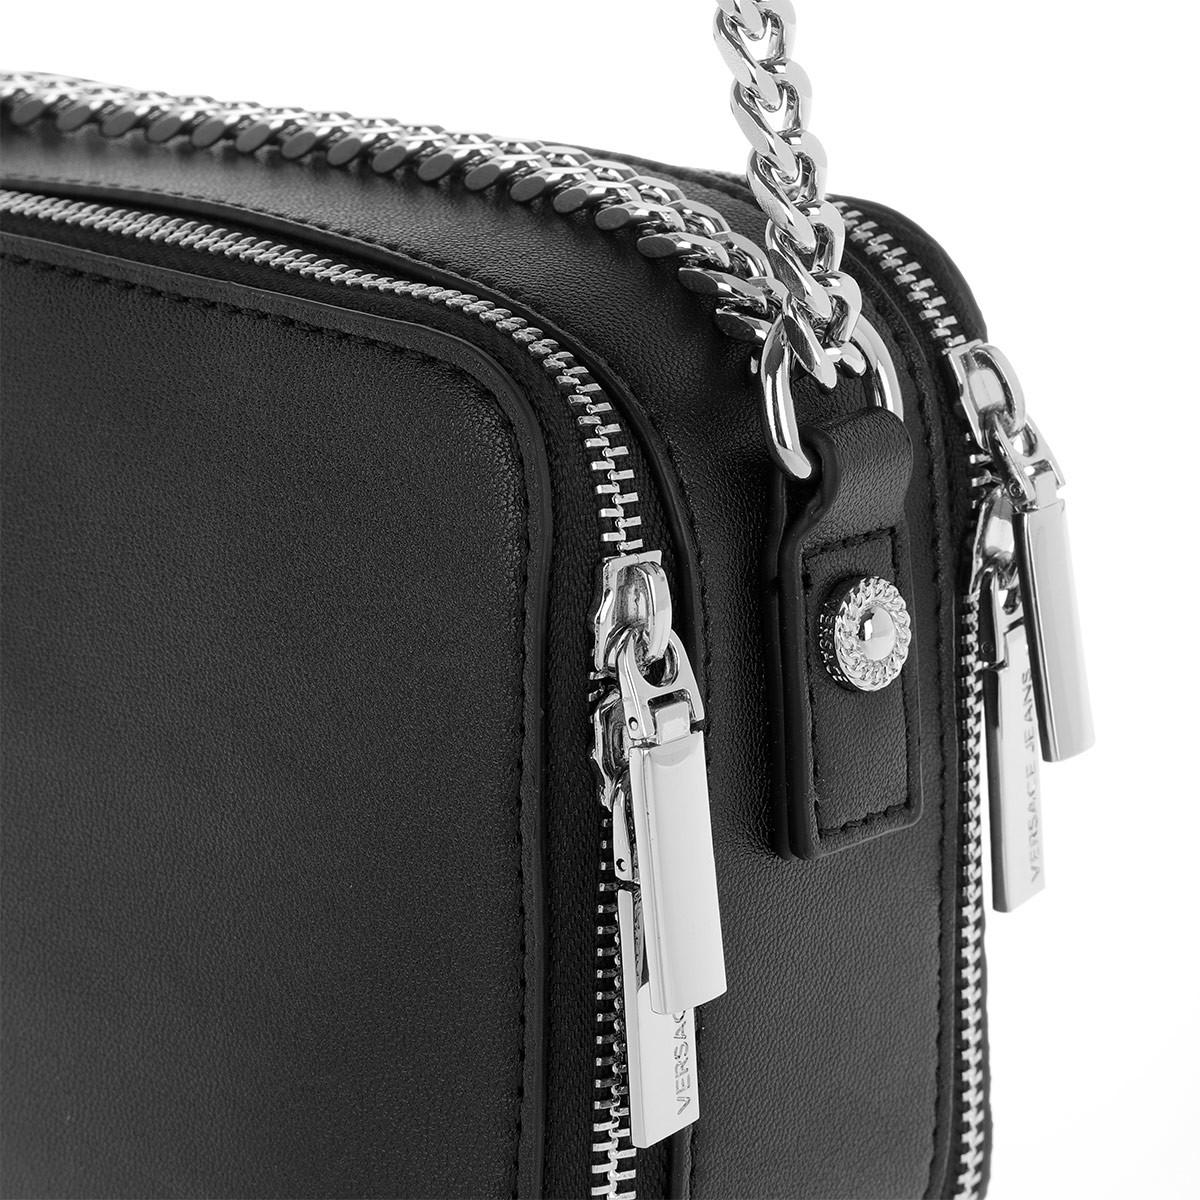 Versace Jeans Synthetic Silver Studded Chain Crossbody Bag Nero in Metallic - Lyst